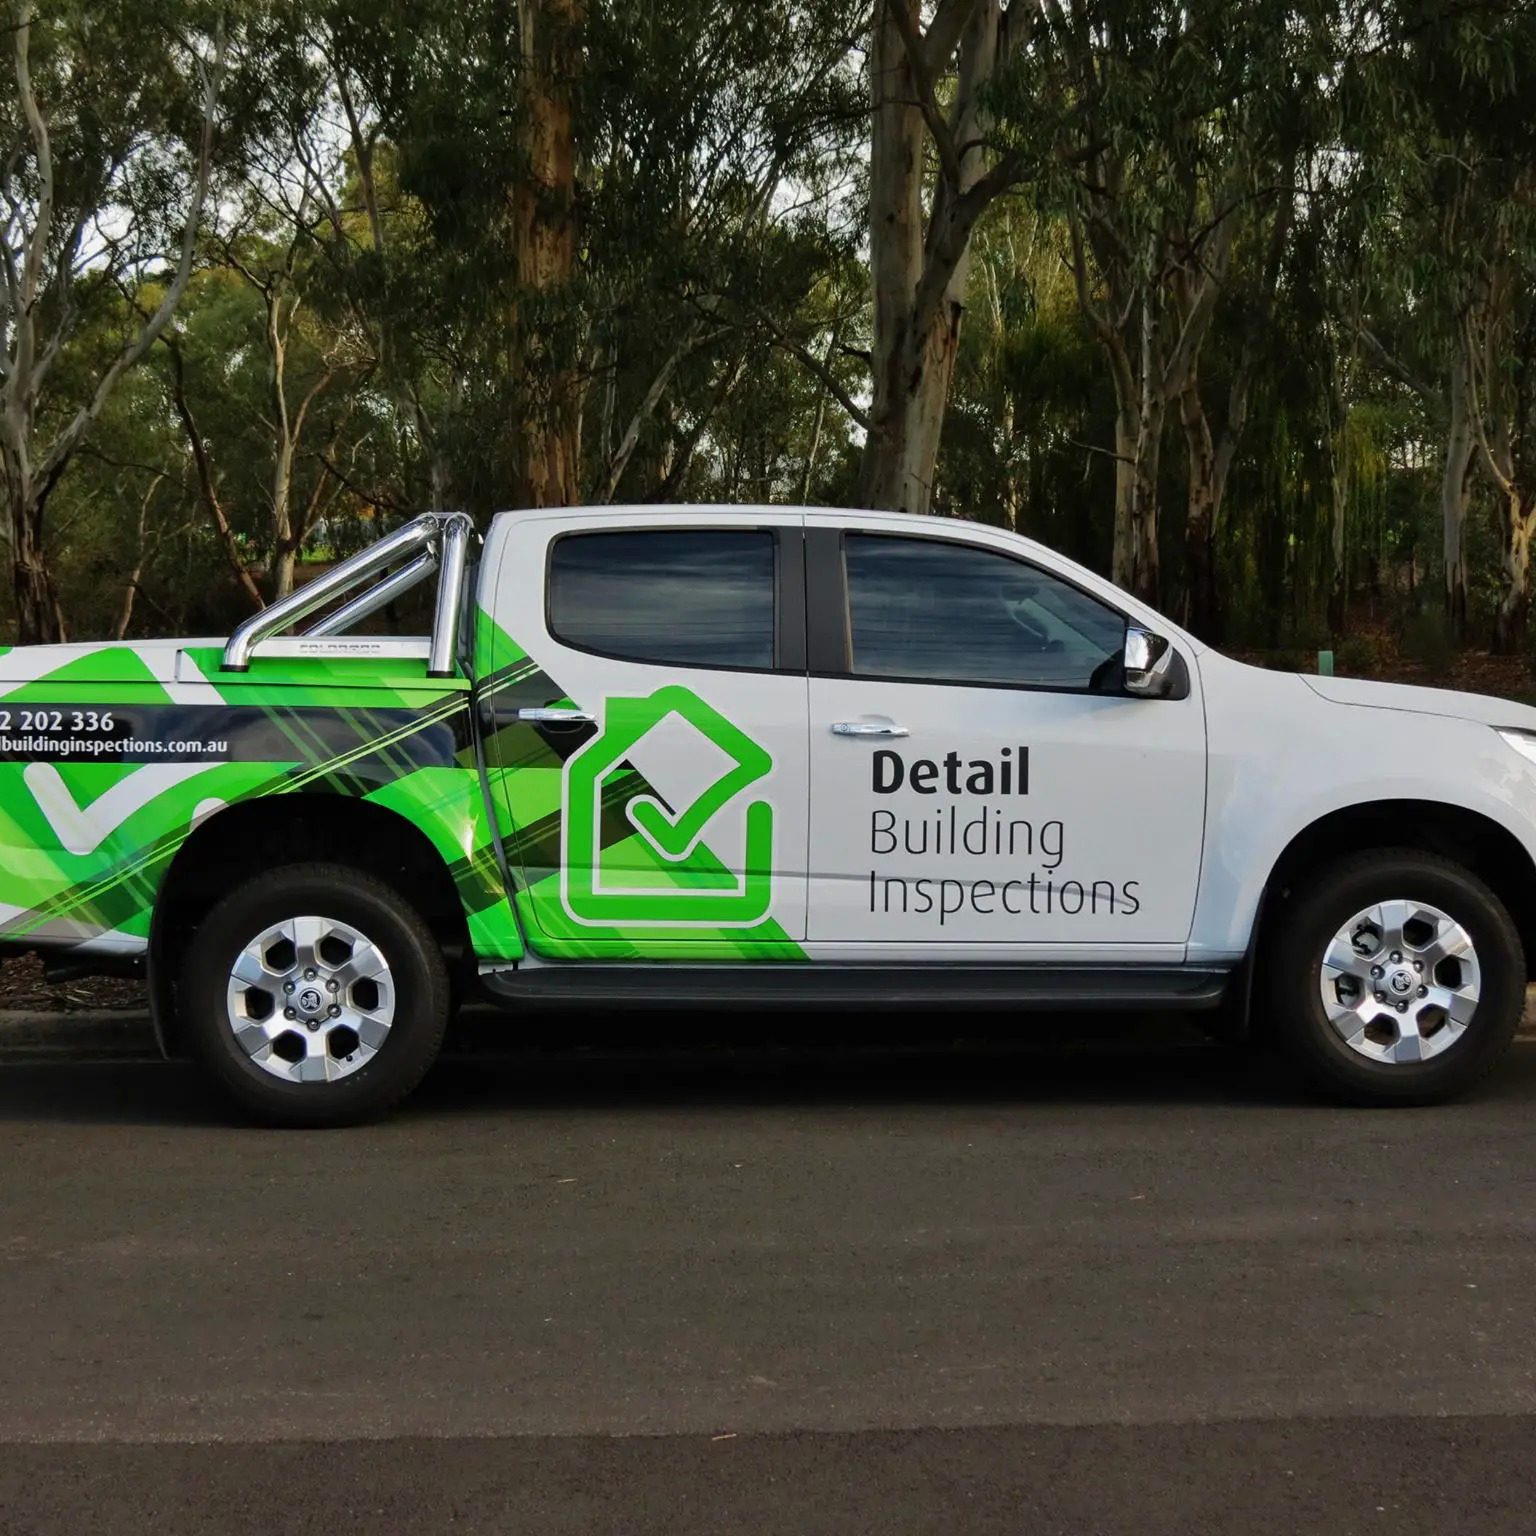 Pest and Building Inspections Adelaide